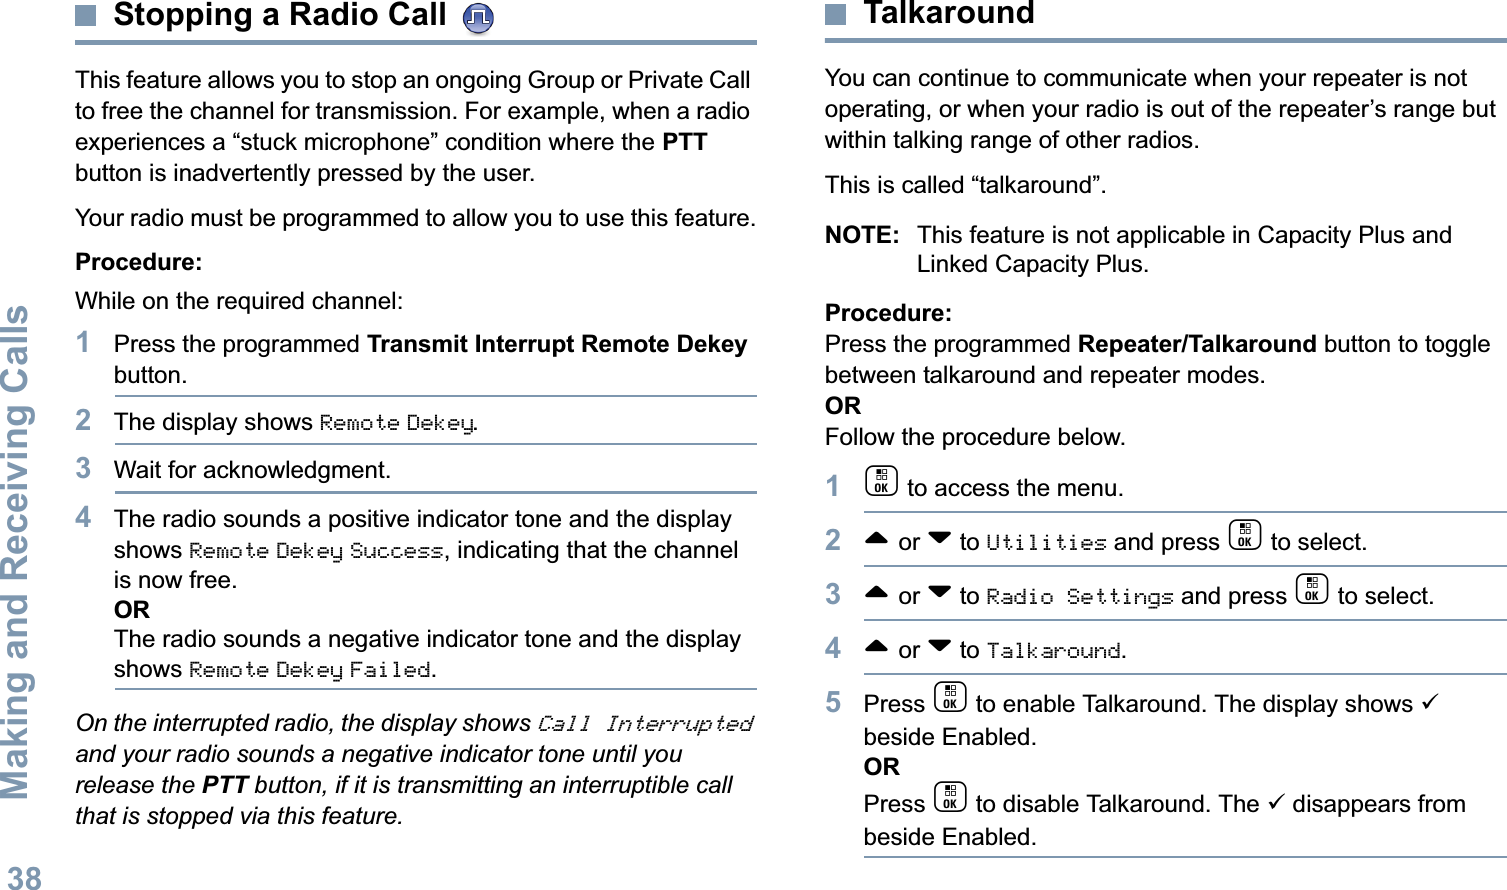 Making and Receiving CallsEnglish38Stopping a Radio Call This feature allows you to stop an ongoing Group or Private Call to free the channel for transmission. For example, when a radio experiences a “stuck microphone” condition where the PTT button is inadvertently pressed by the user.Your radio must be programmed to allow you to use this feature.Procedure:While on the required channel:1Press the programmed Transmit Interrupt Remote Dekey button.2The display shows Remote Dekey.3Wait for acknowledgment.4The radio sounds a positive indicator tone and the display shows Remote Dekey Success, indicating that the channel is now free.ORThe radio sounds a negative indicator tone and the display shows Remote Dekey Failed.On the interrupted radio, the display shows Call Interrupted and your radio sounds a negative indicator tone until you release the PTT button, if it is transmitting an interruptible call that is stopped via this feature.TalkaroundYou can continue to communicate when your repeater is not operating, or when your radio is out of the repeater’s range but within talking range of other radios. This is called “talkaround”.NOTE: This feature is not applicable in Capacity Plus and Linked Capacity Plus.Procedure:Press the programmed Repeater/Talkaround button to toggle between talkaround and repeater modes.ORFollow the procedure below.1c to access the menu.2^ or v to Utilities and press c to select.3^ or v to Radio Settings and press c to select.4^ or v to Talkaround.5Press c to enable Talkaround. The display shows 9 beside Enabled.ORPress c to disable Talkaround. The 9 disappears from beside Enabled.